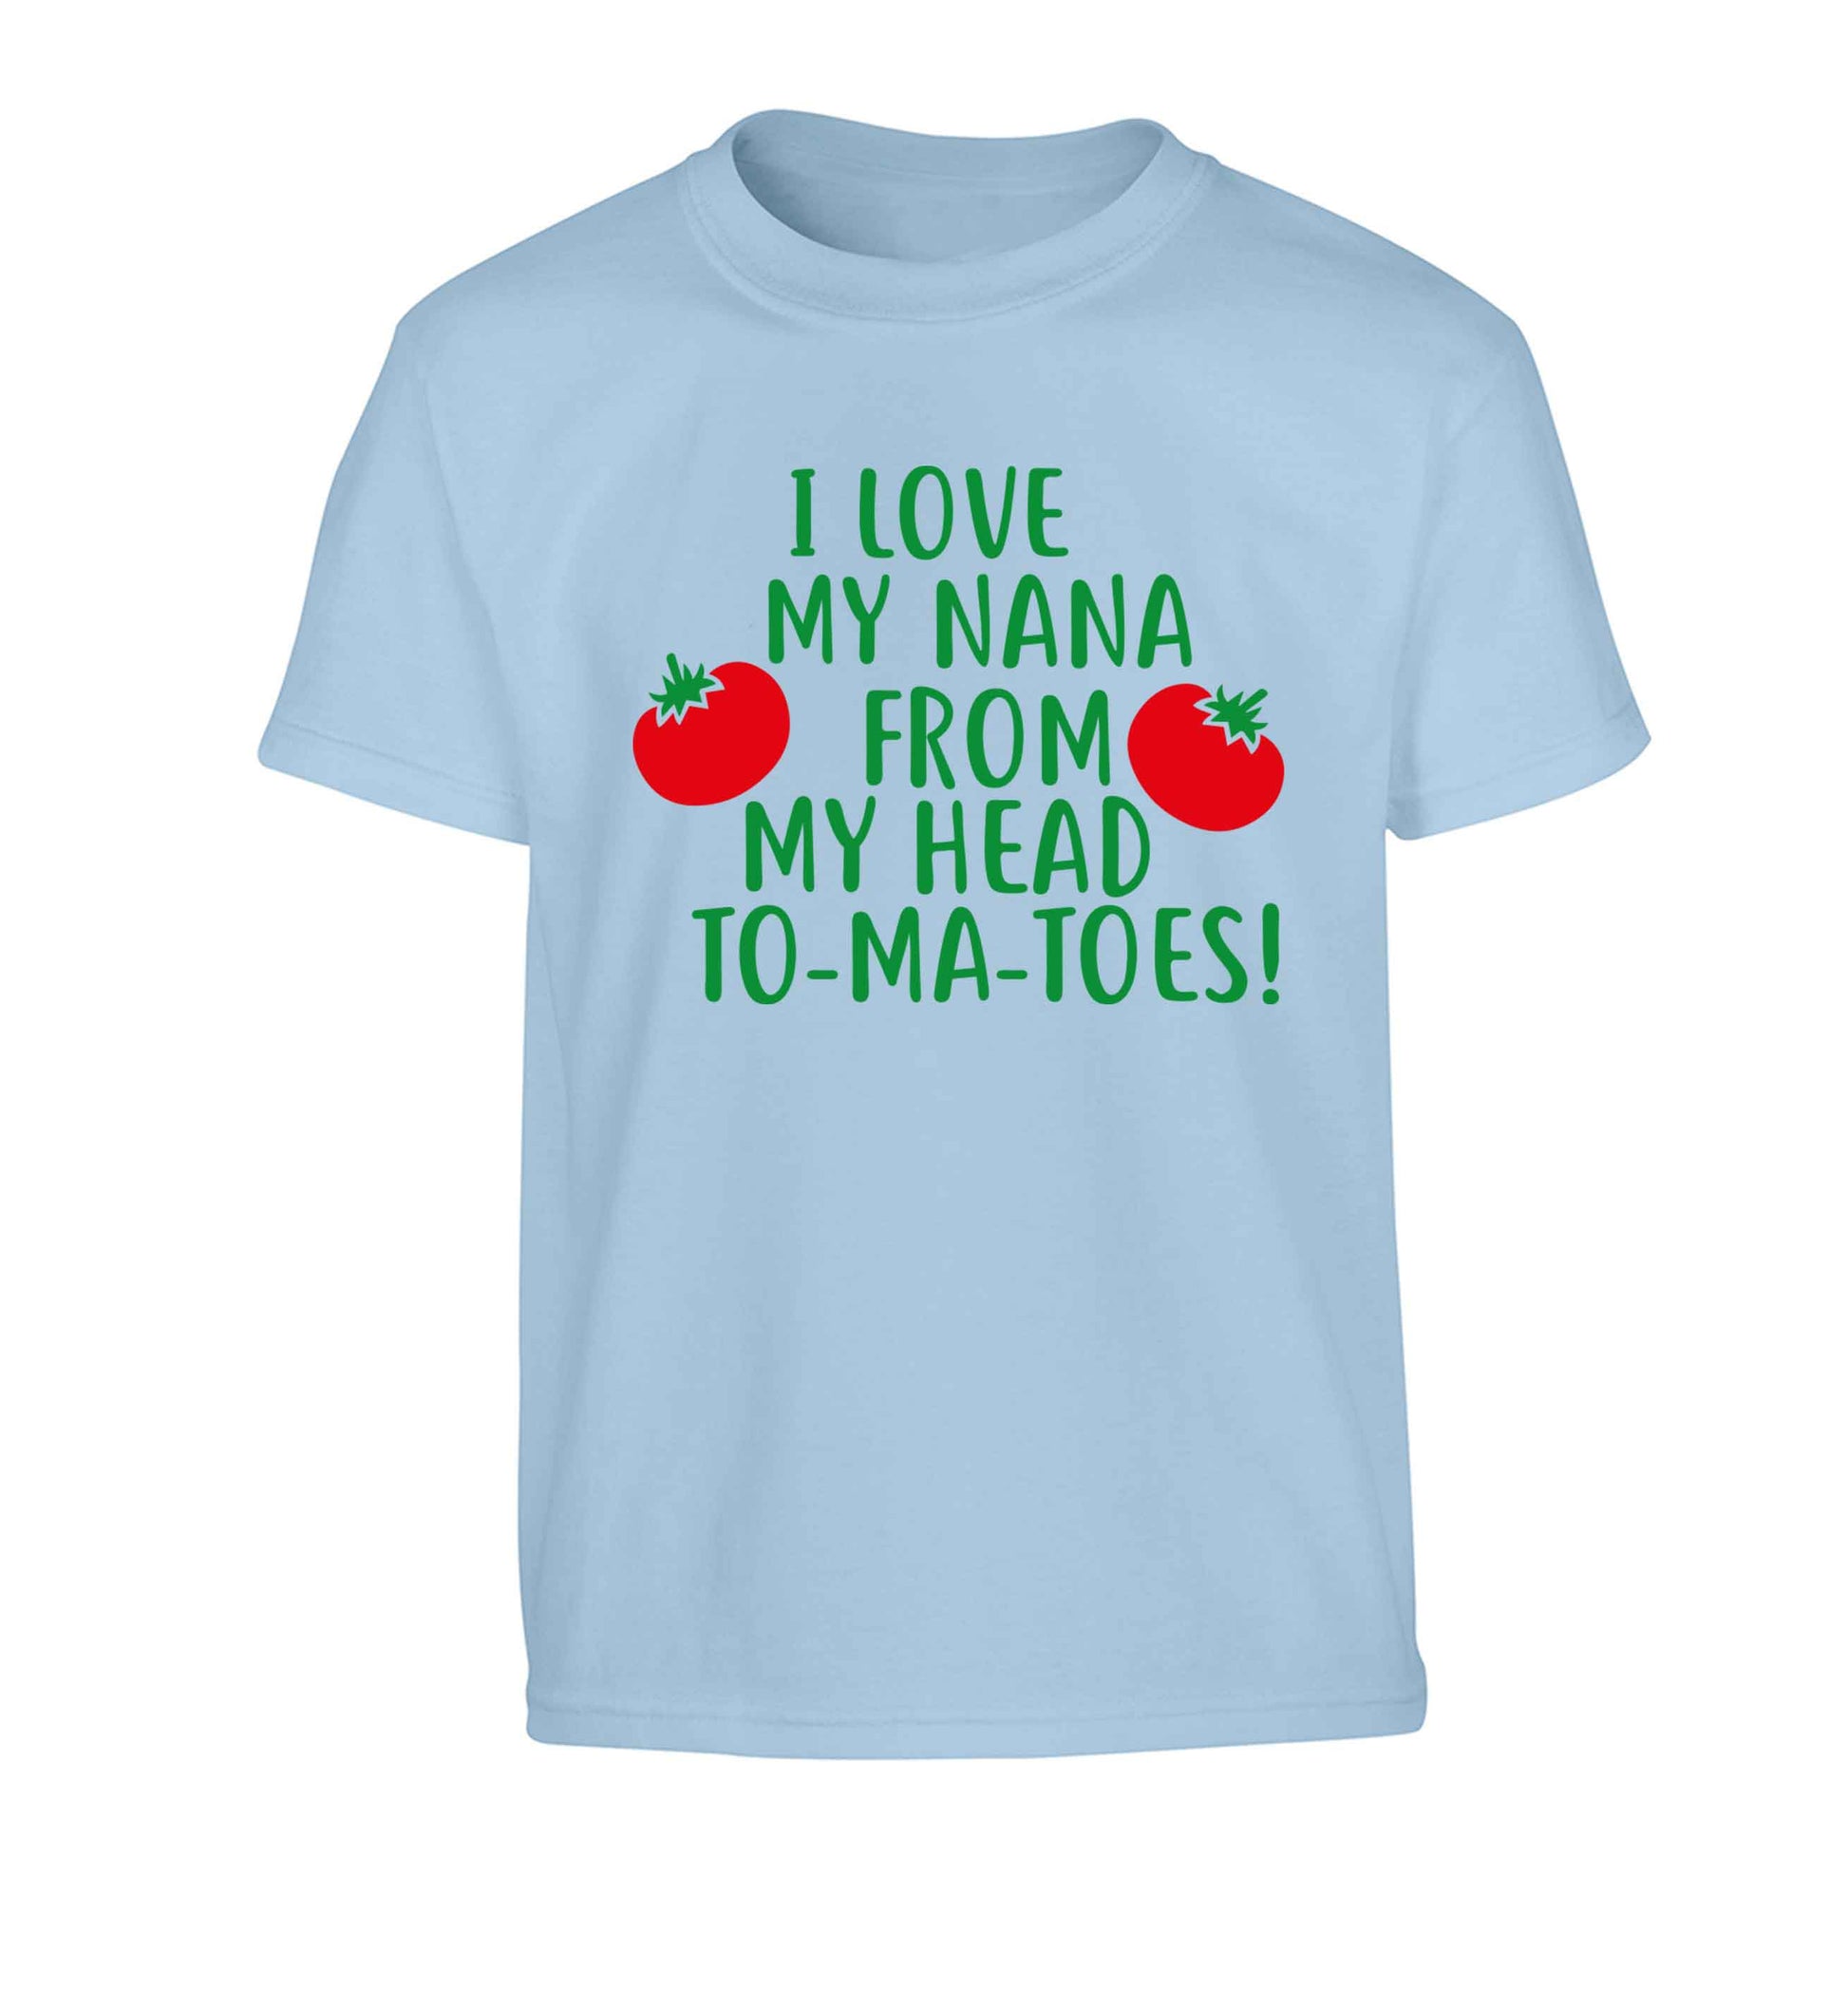 I love my nana from my head to-ma-toes Children's light blue Tshirt 12-13 Years